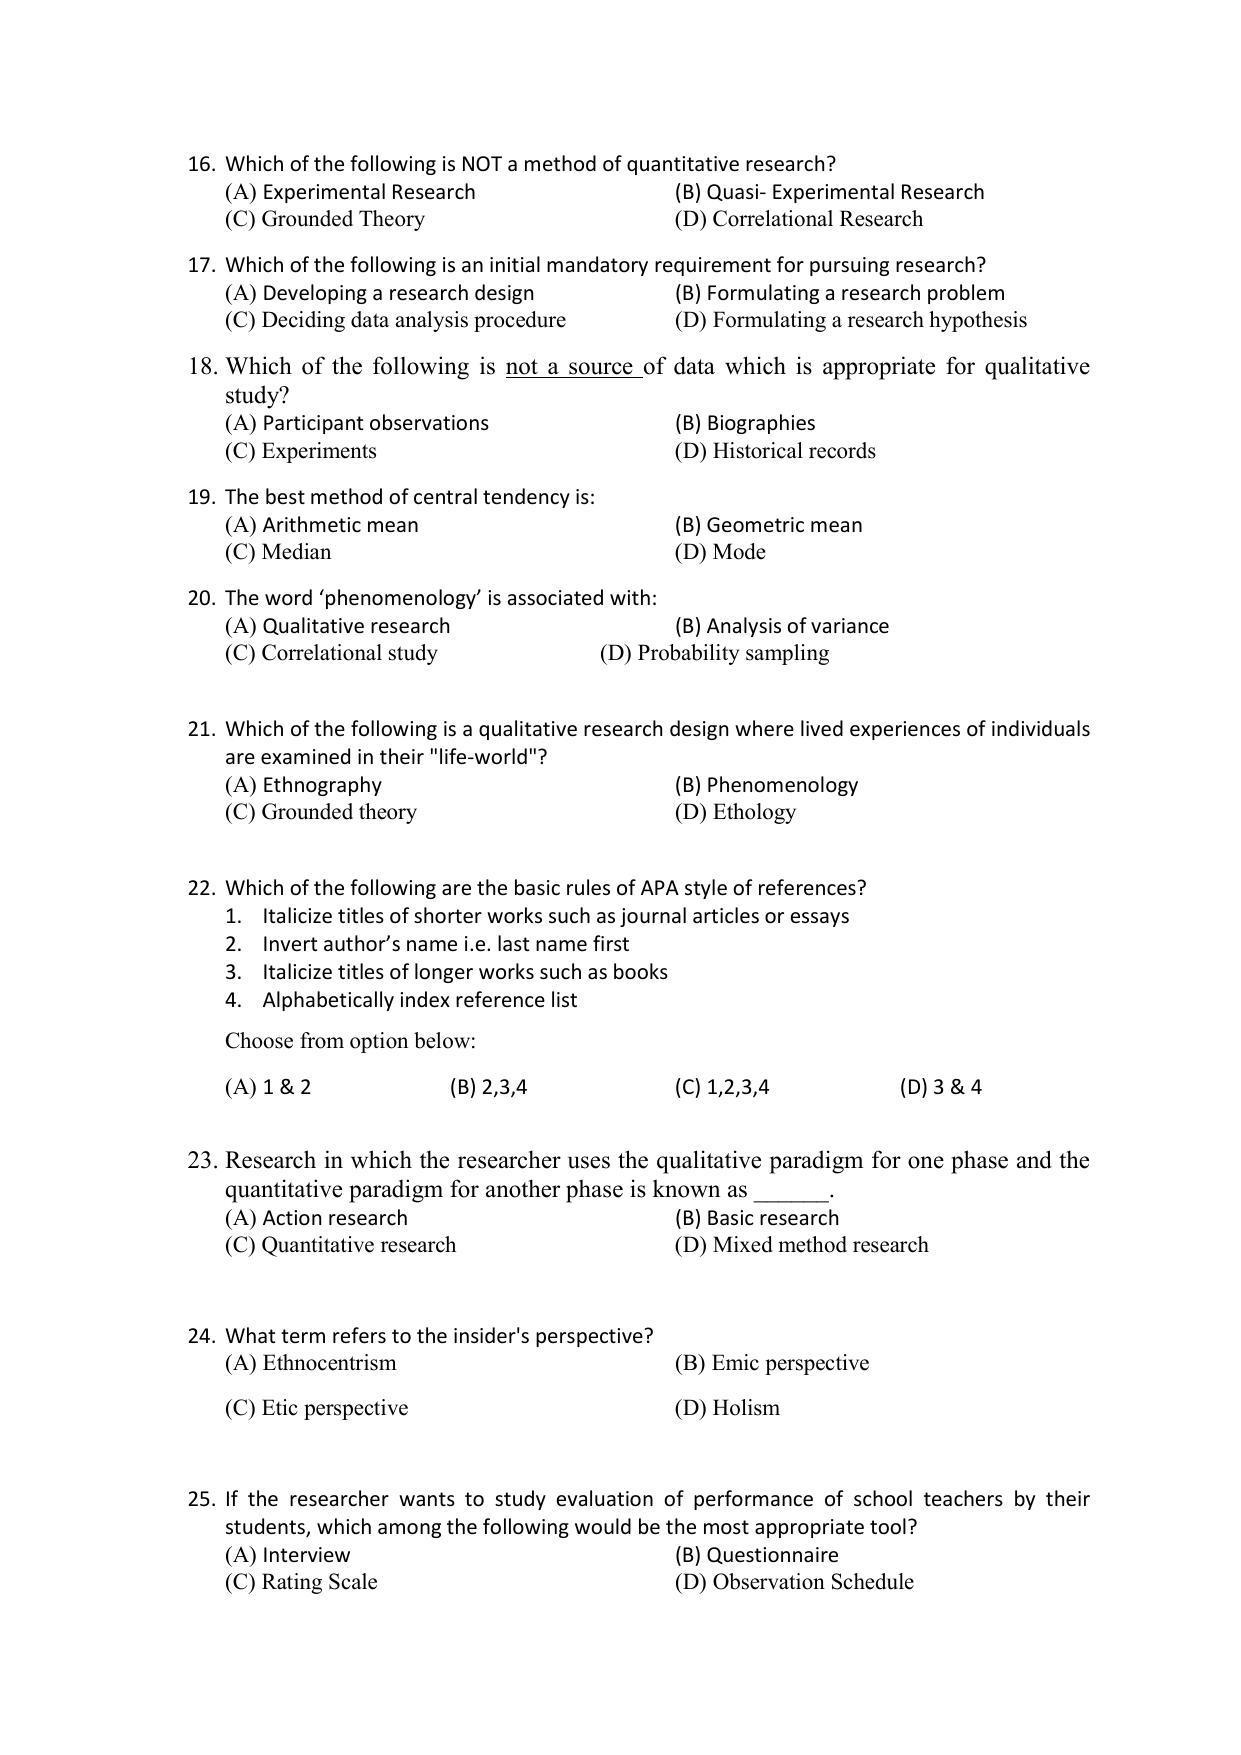 PU MPET Ancient Indian History & Archeology 2022 Question Papers - Page 28